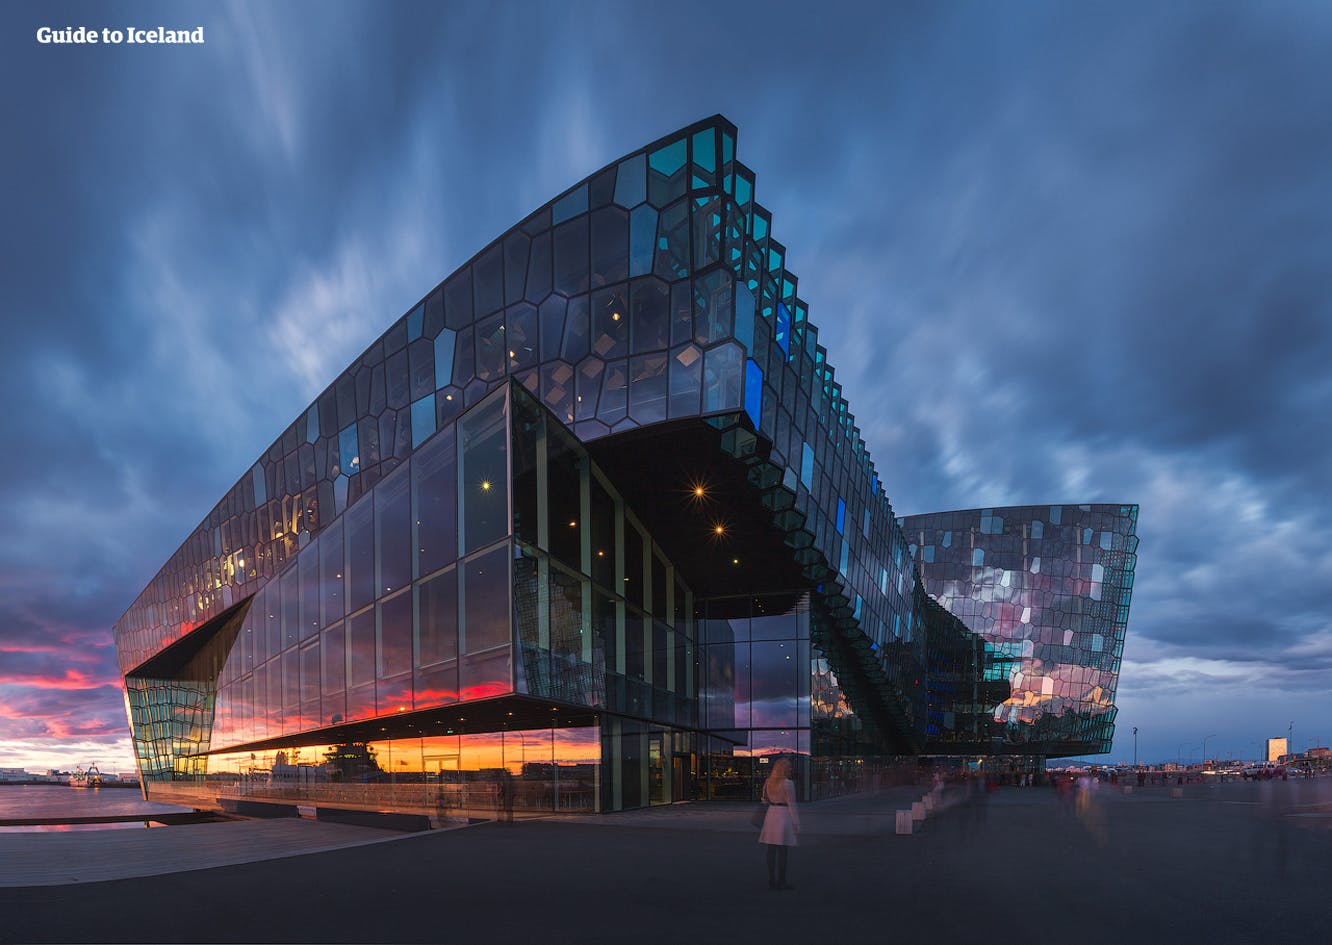 Harpa Concert Hall in the heart of Reykjavik city